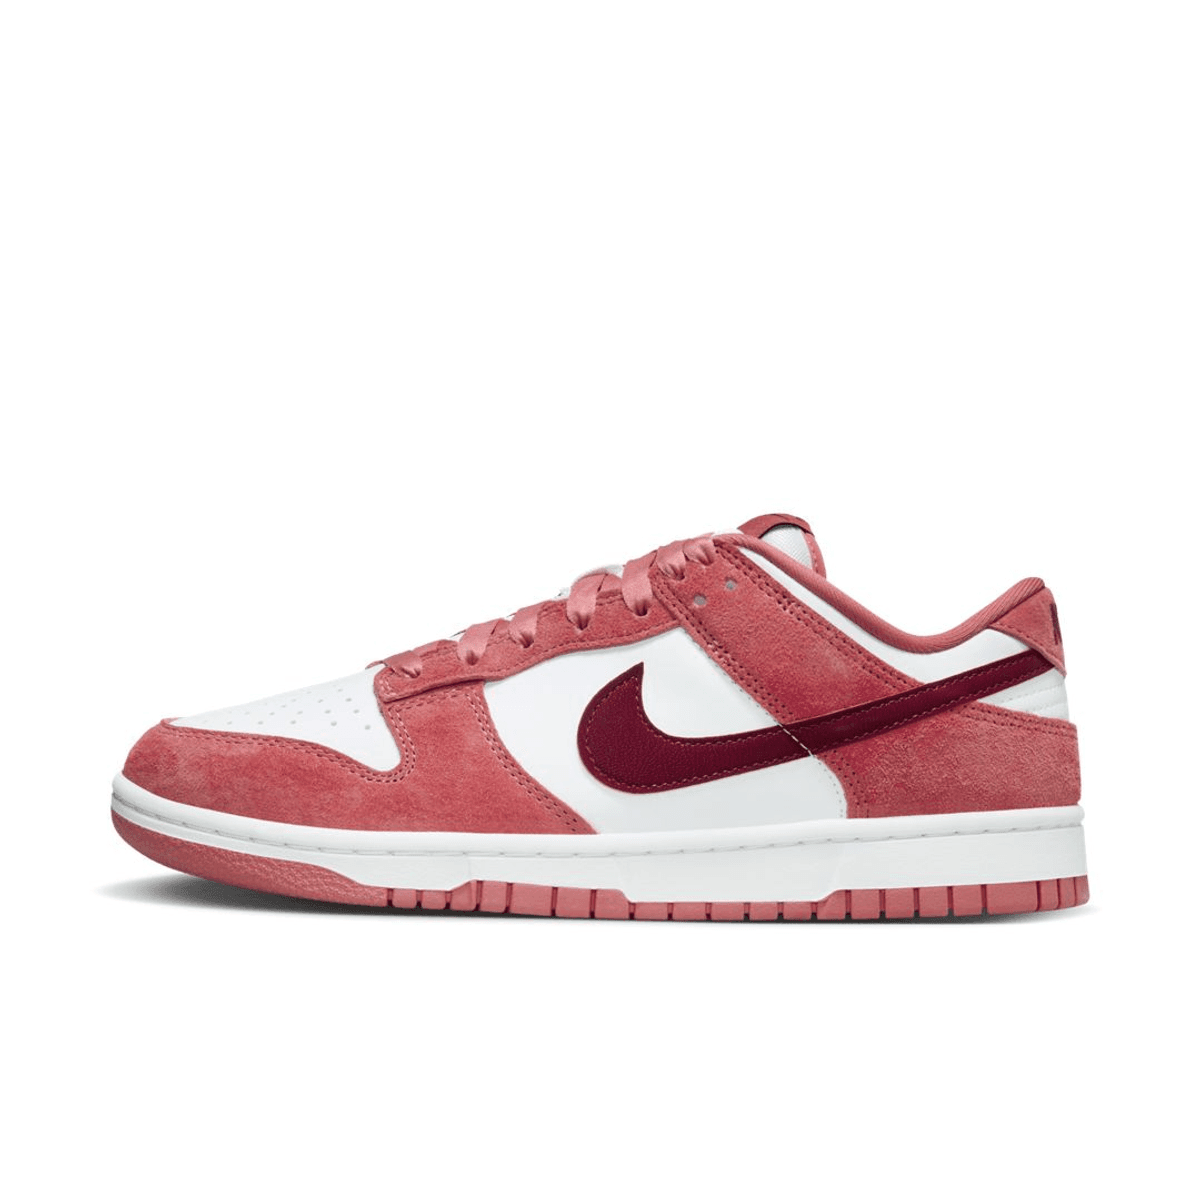 The Nike Dunk Low “Valentine’s Day” (W) Releases January 23rd